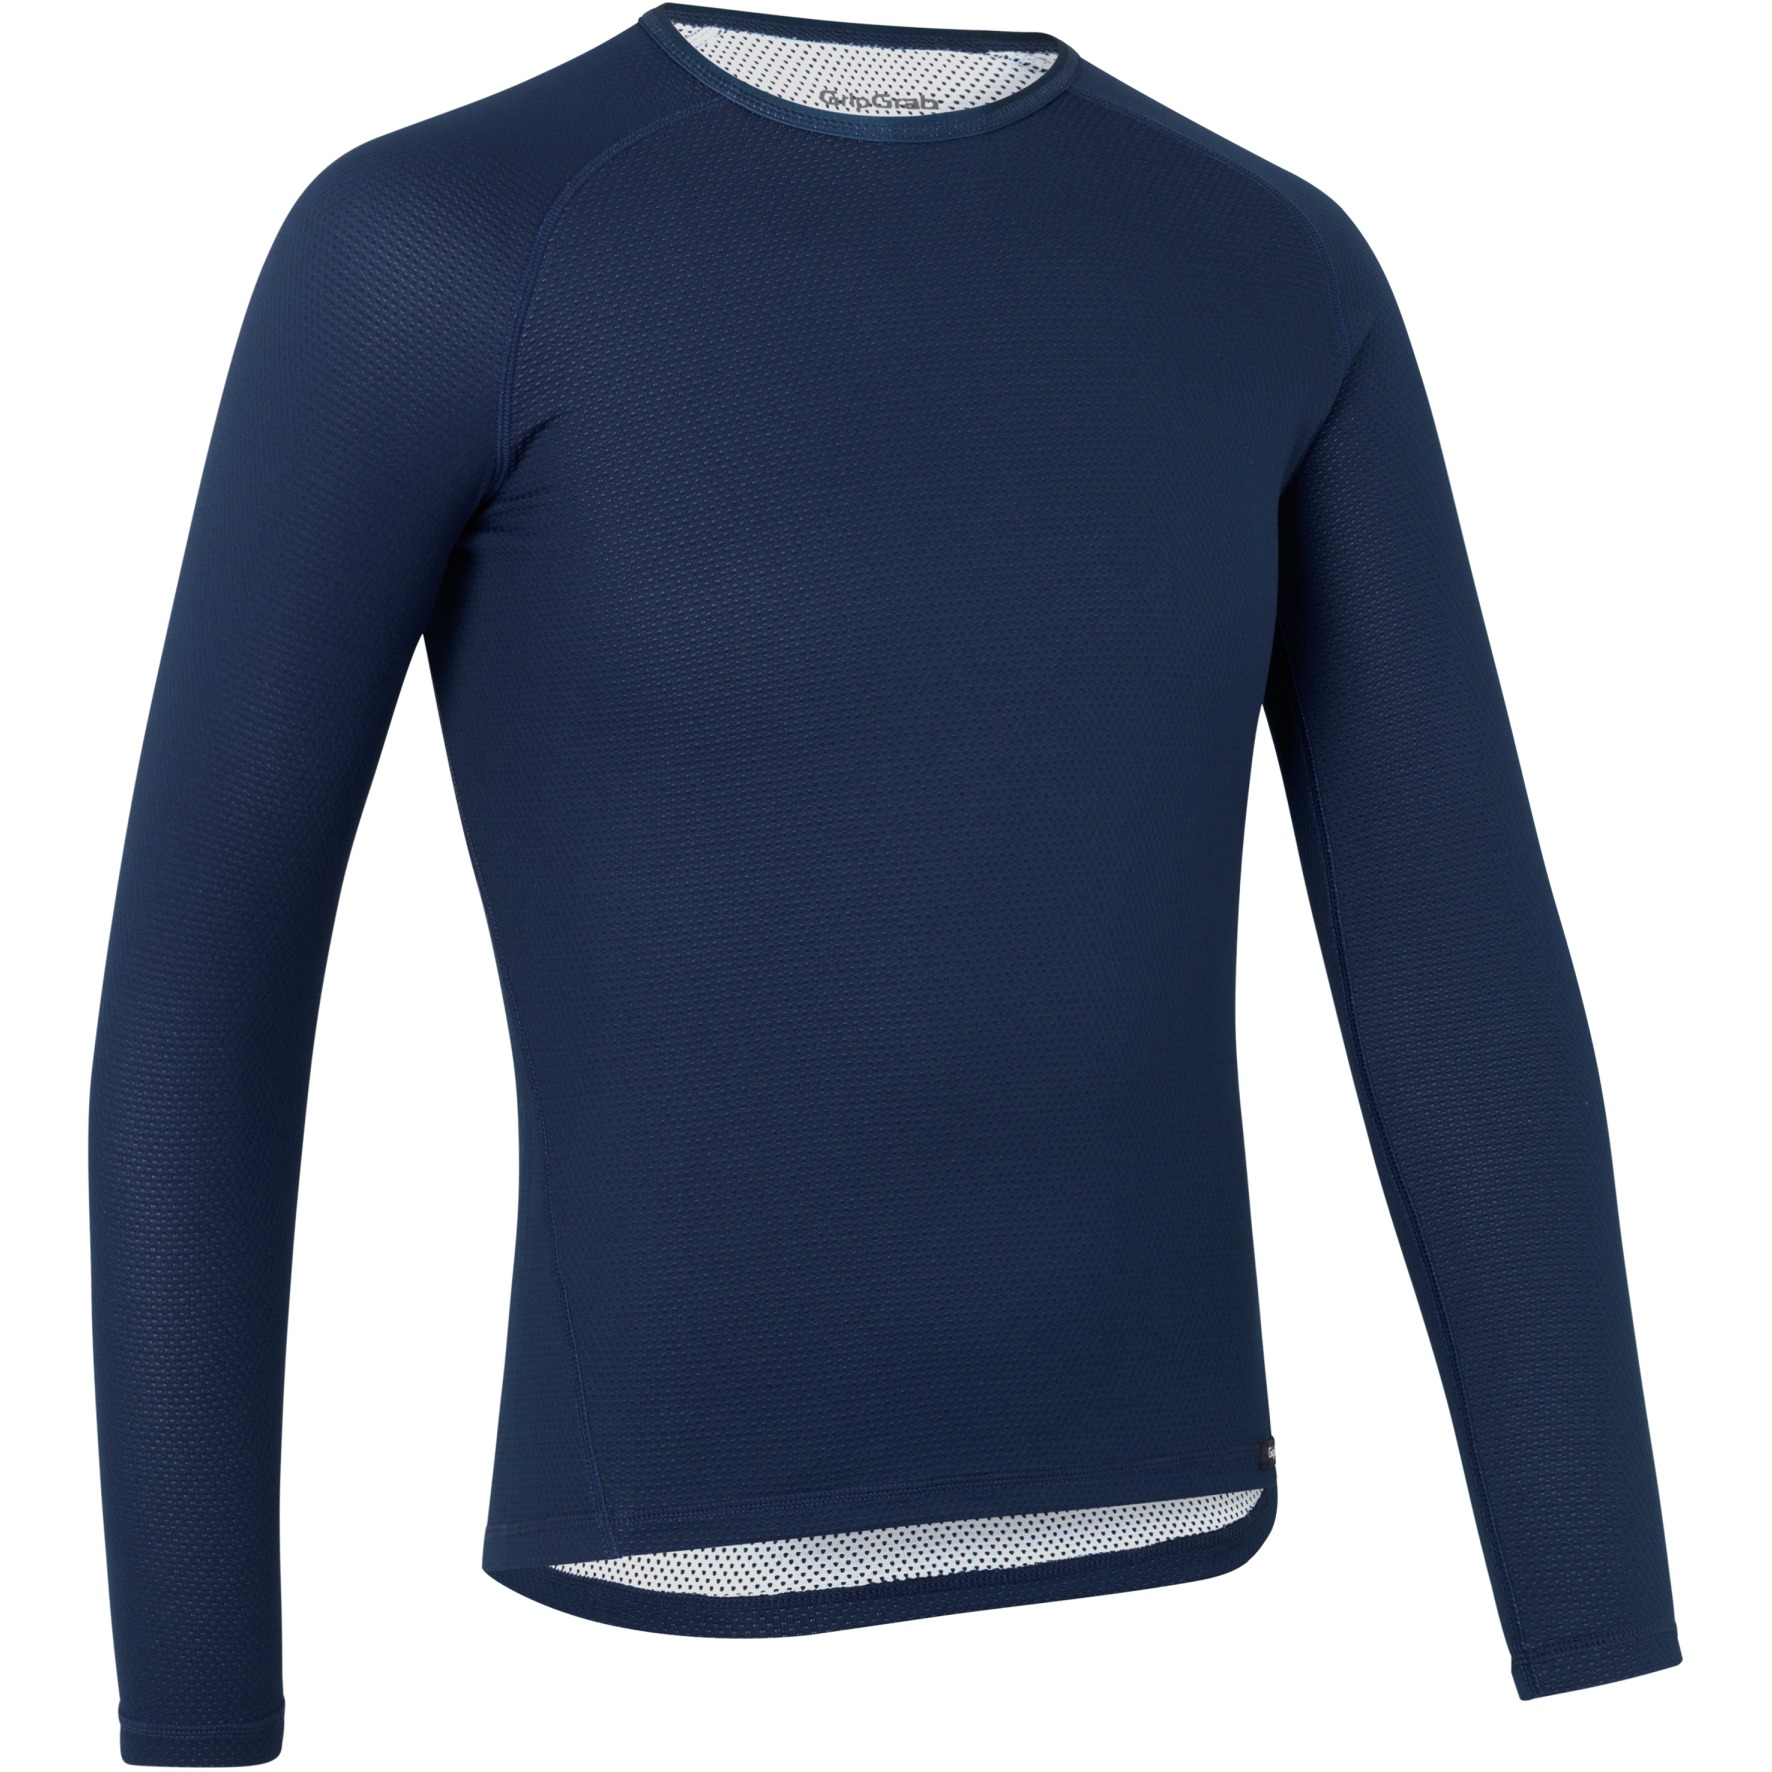 Image of GripGrab Ride Thermal Long Sleeve Base Layer - Navy Blue